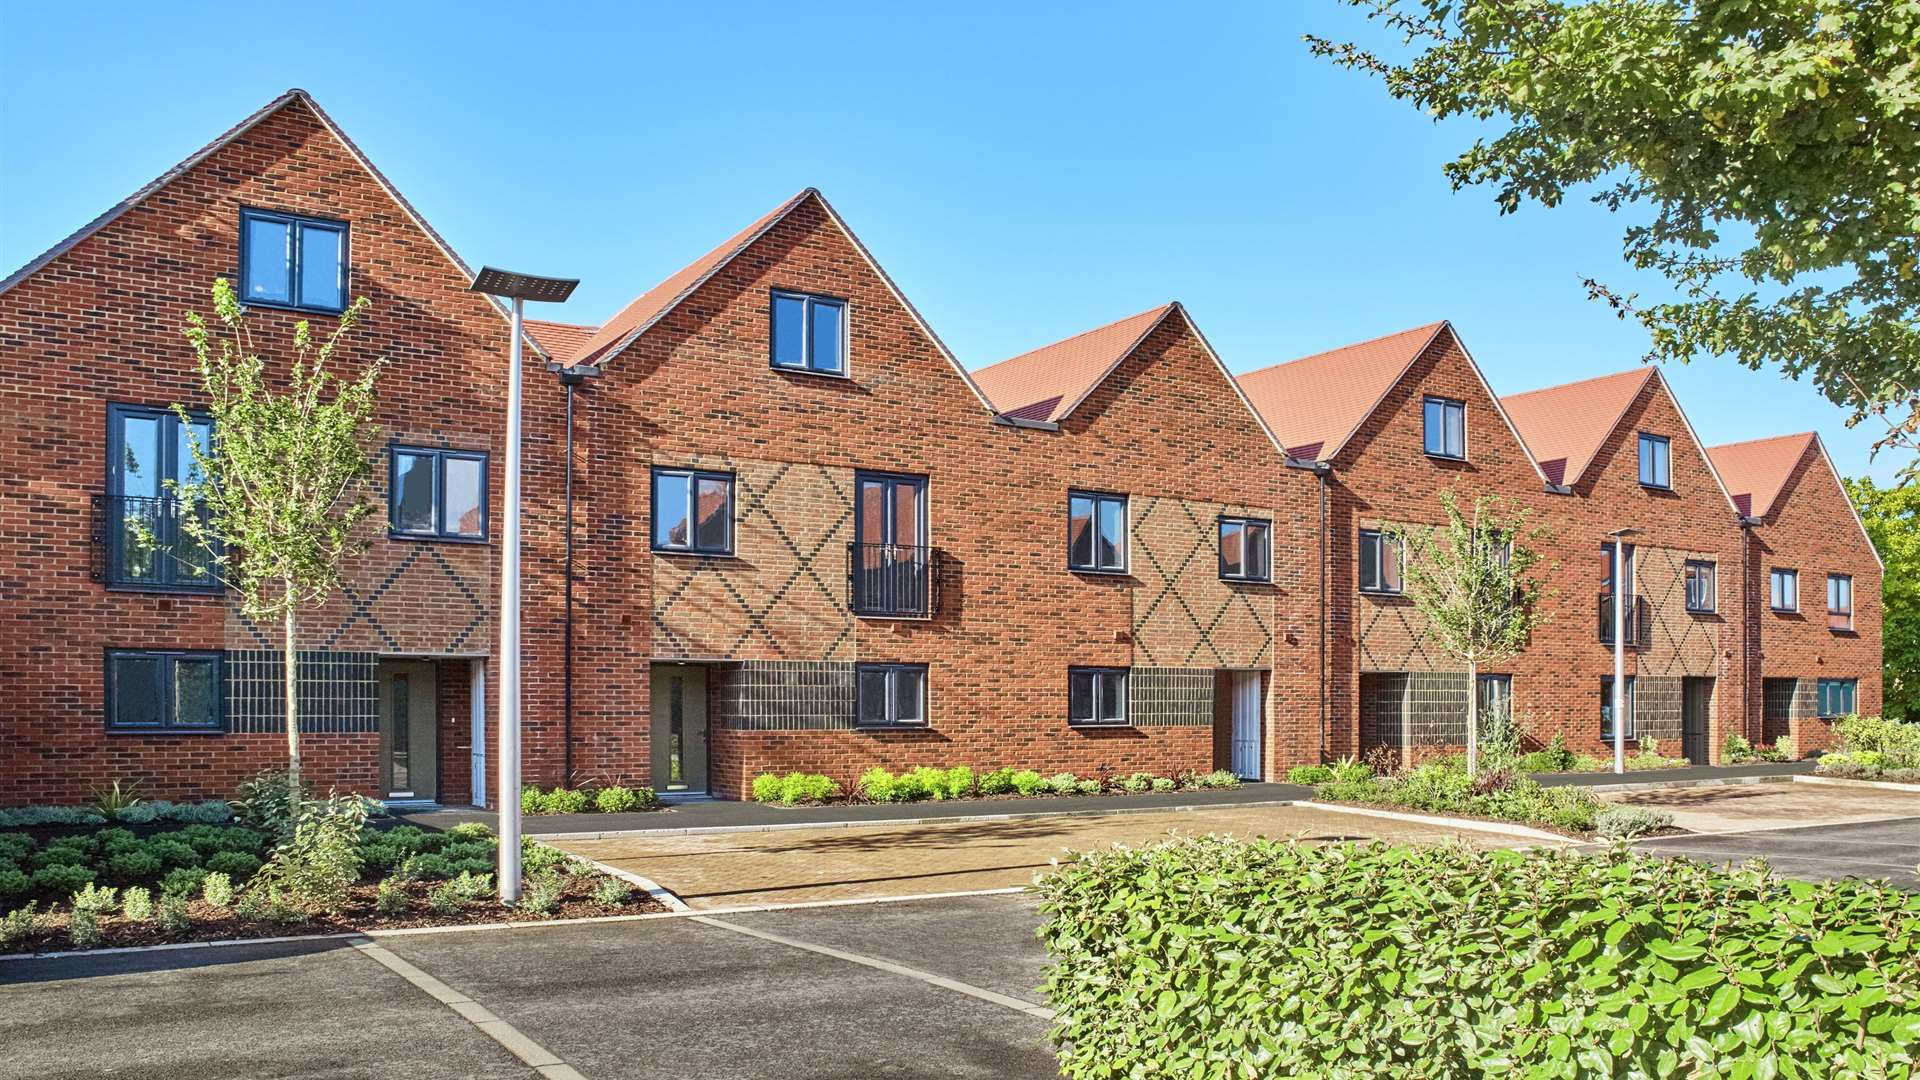 A Countryside development at Horsted Park